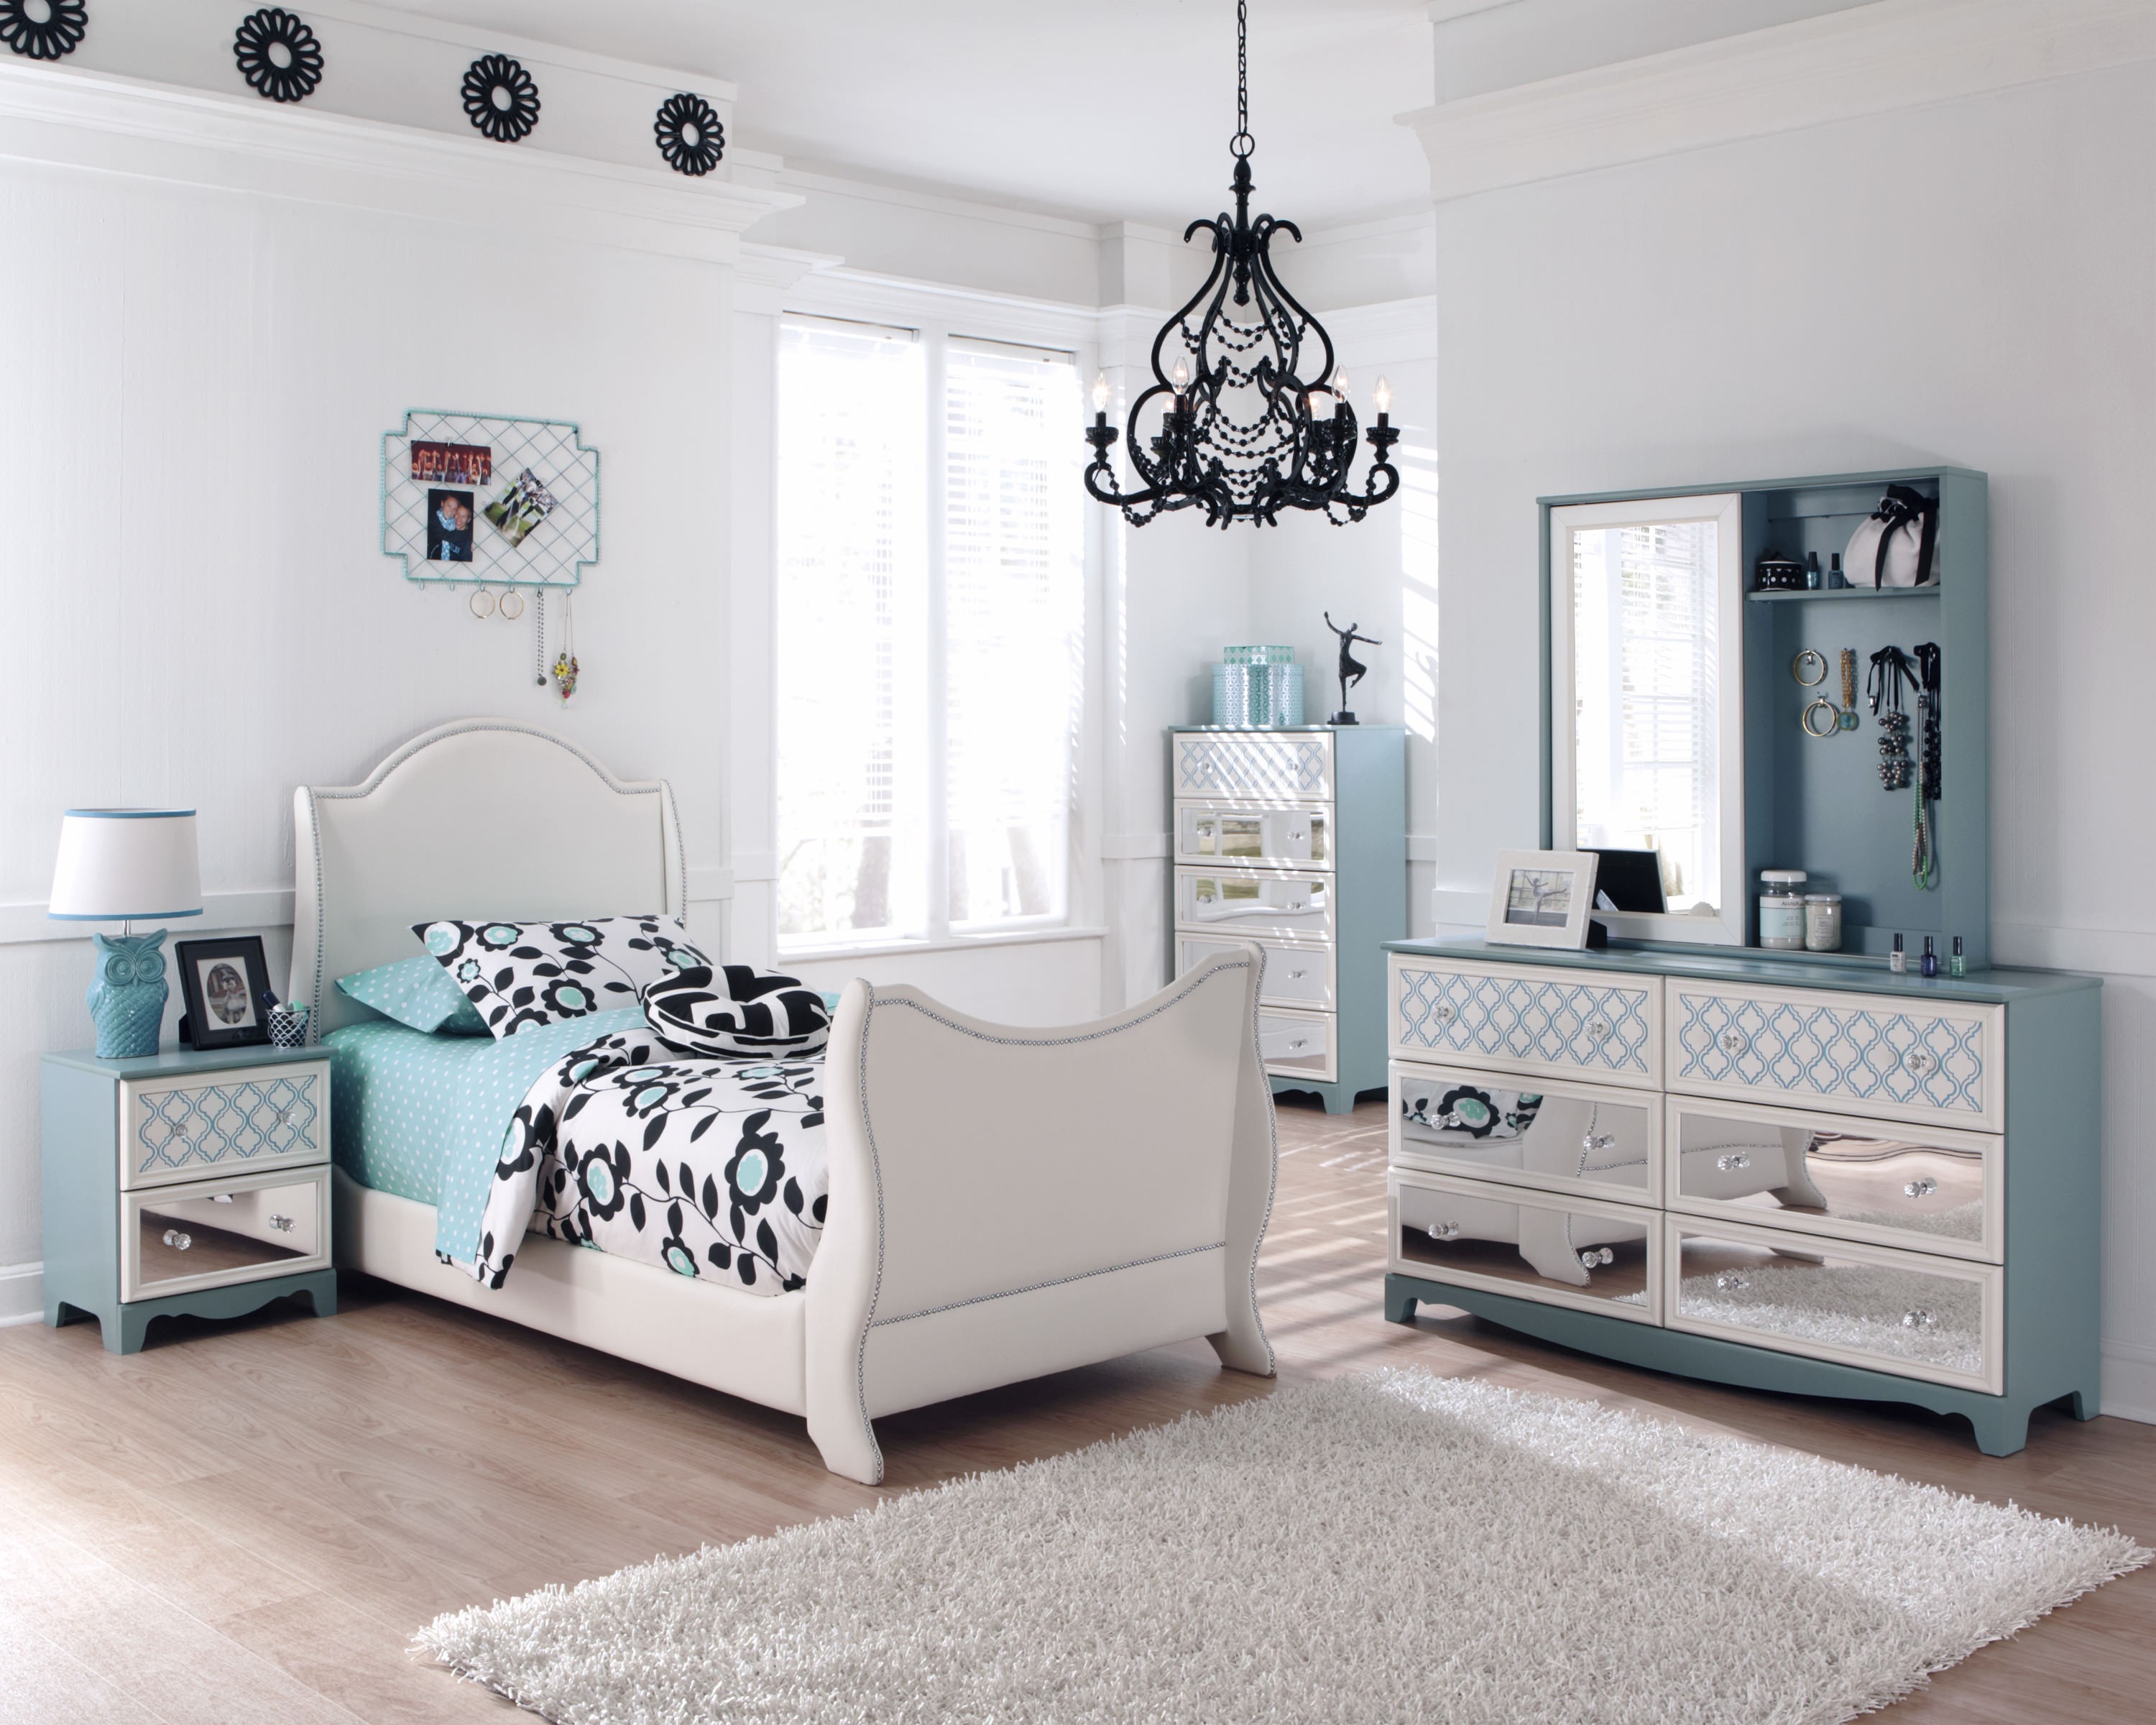 decorating with mirrored bedroom furniture photo - 10